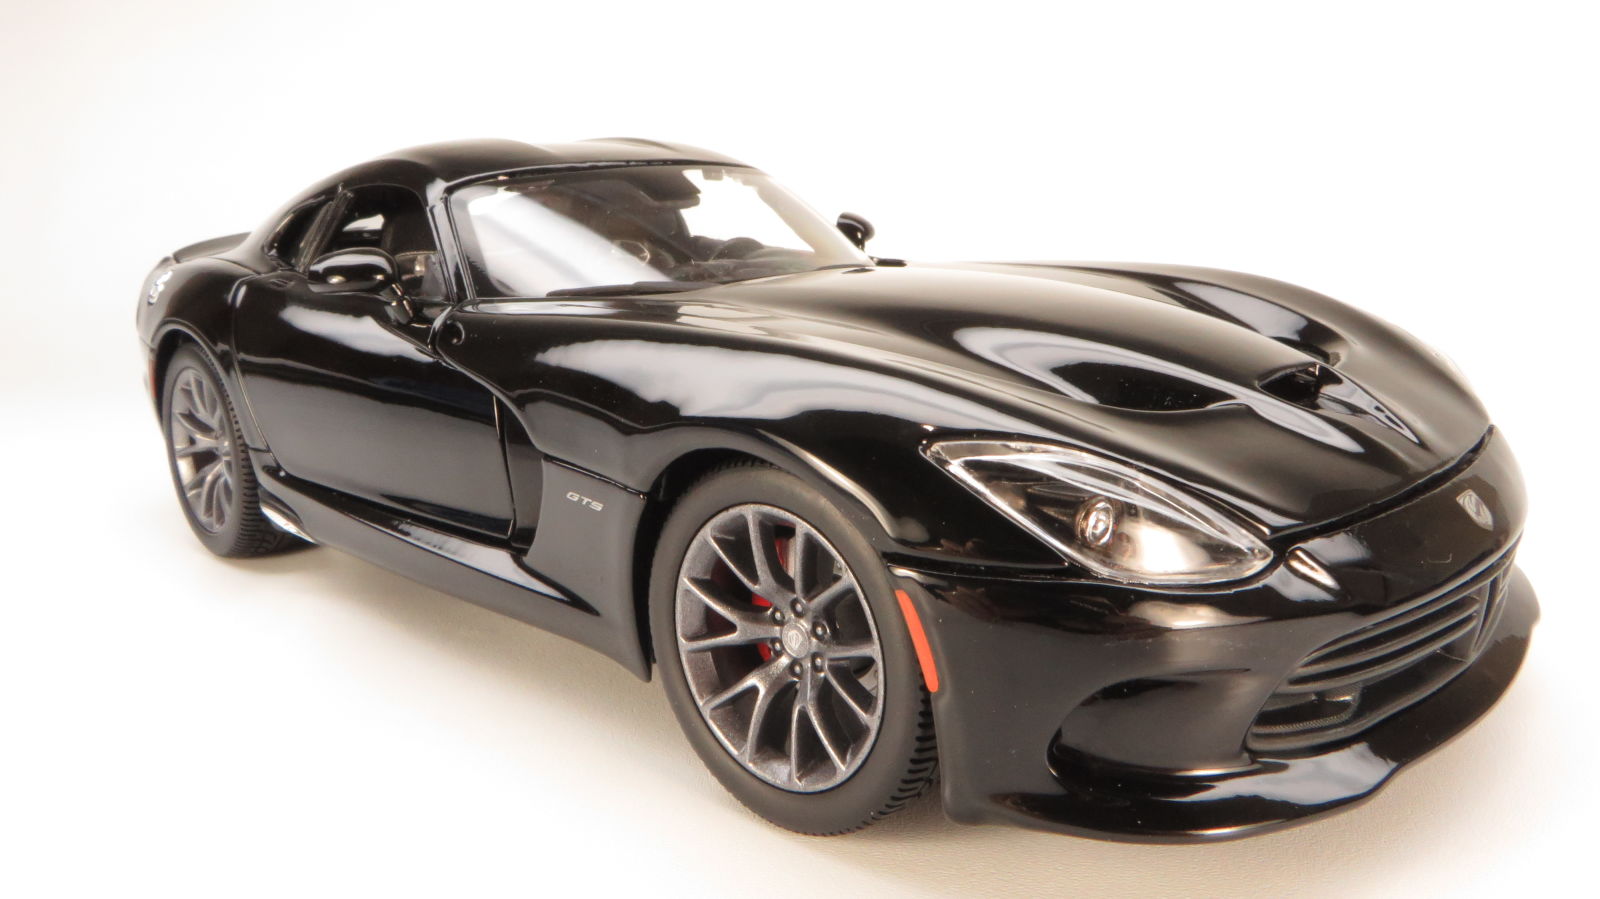 Illustration for article titled Maisto 2013 SRT Viper GTS 1:18 Scale